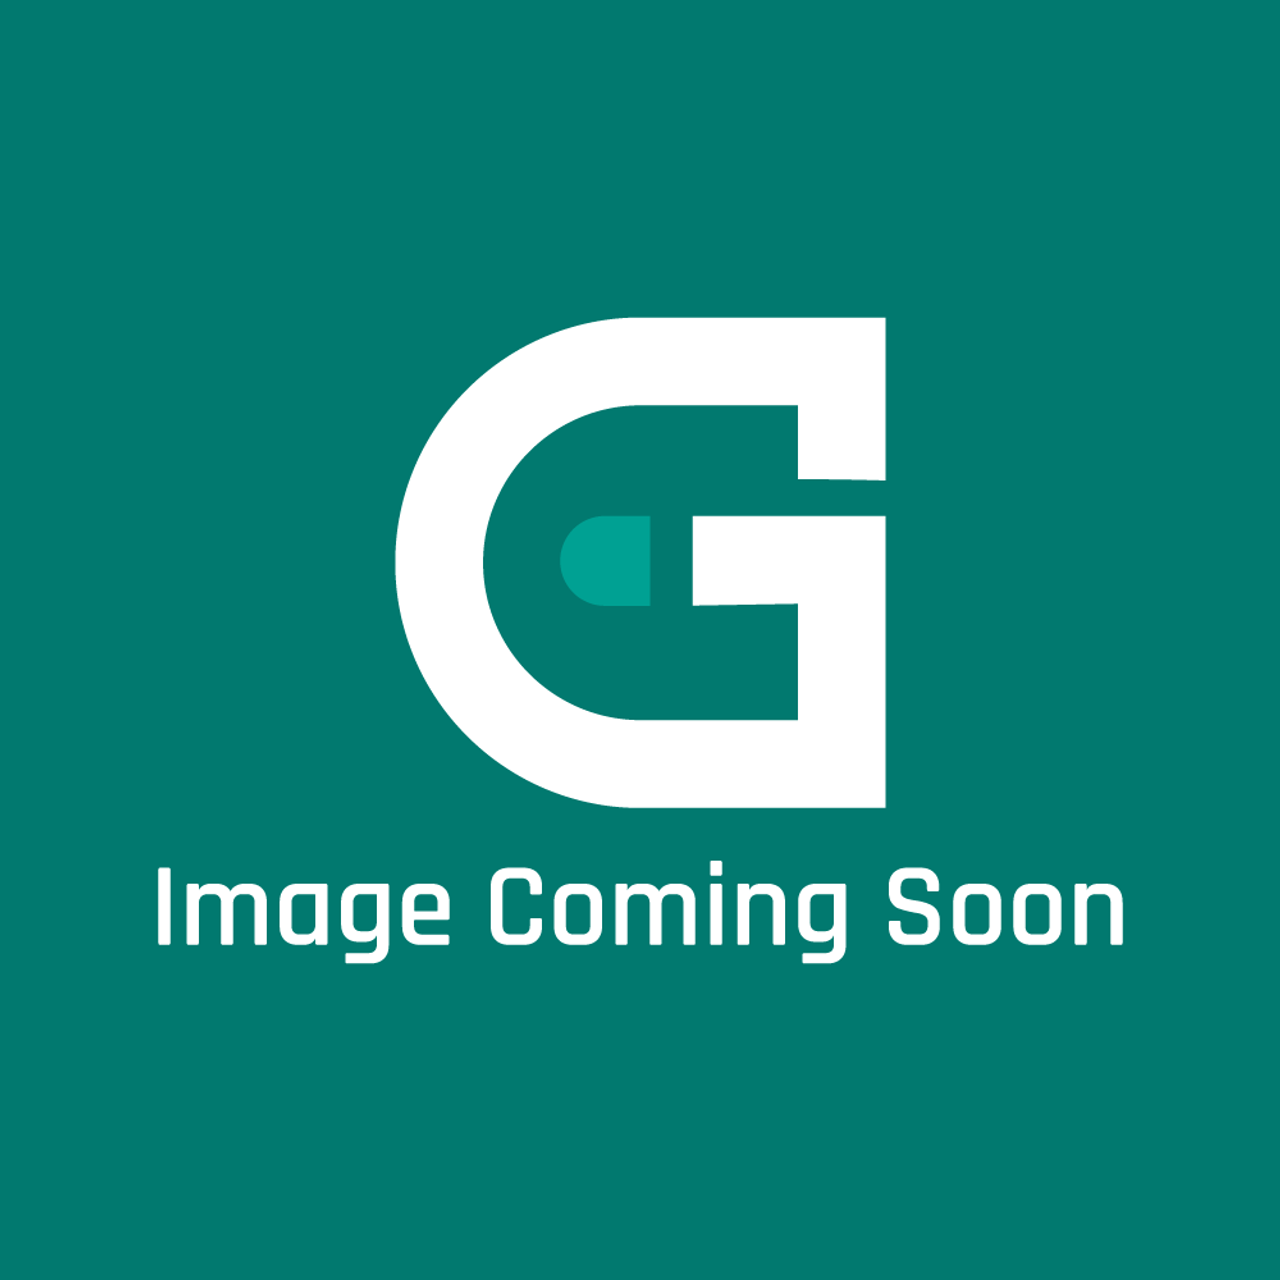 AGA Marvel A4249 - Pipe( Rh):Gas Feed 3-Oven Aga - Image Coming Soon!